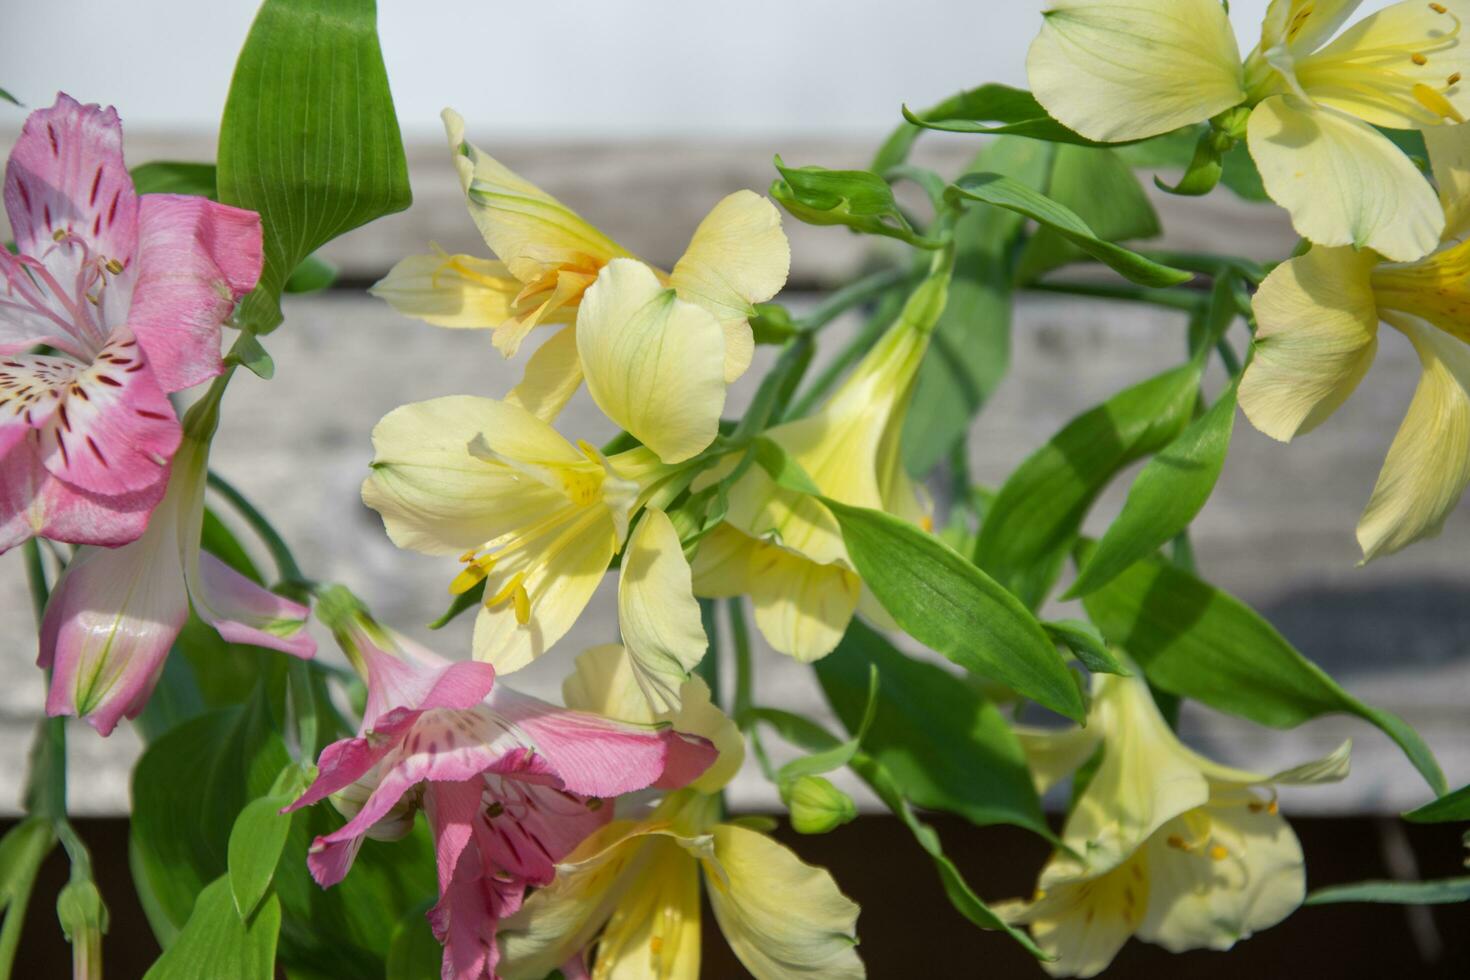 Peruvian lily. Yellow and pink flowers on a light blurred background. photo